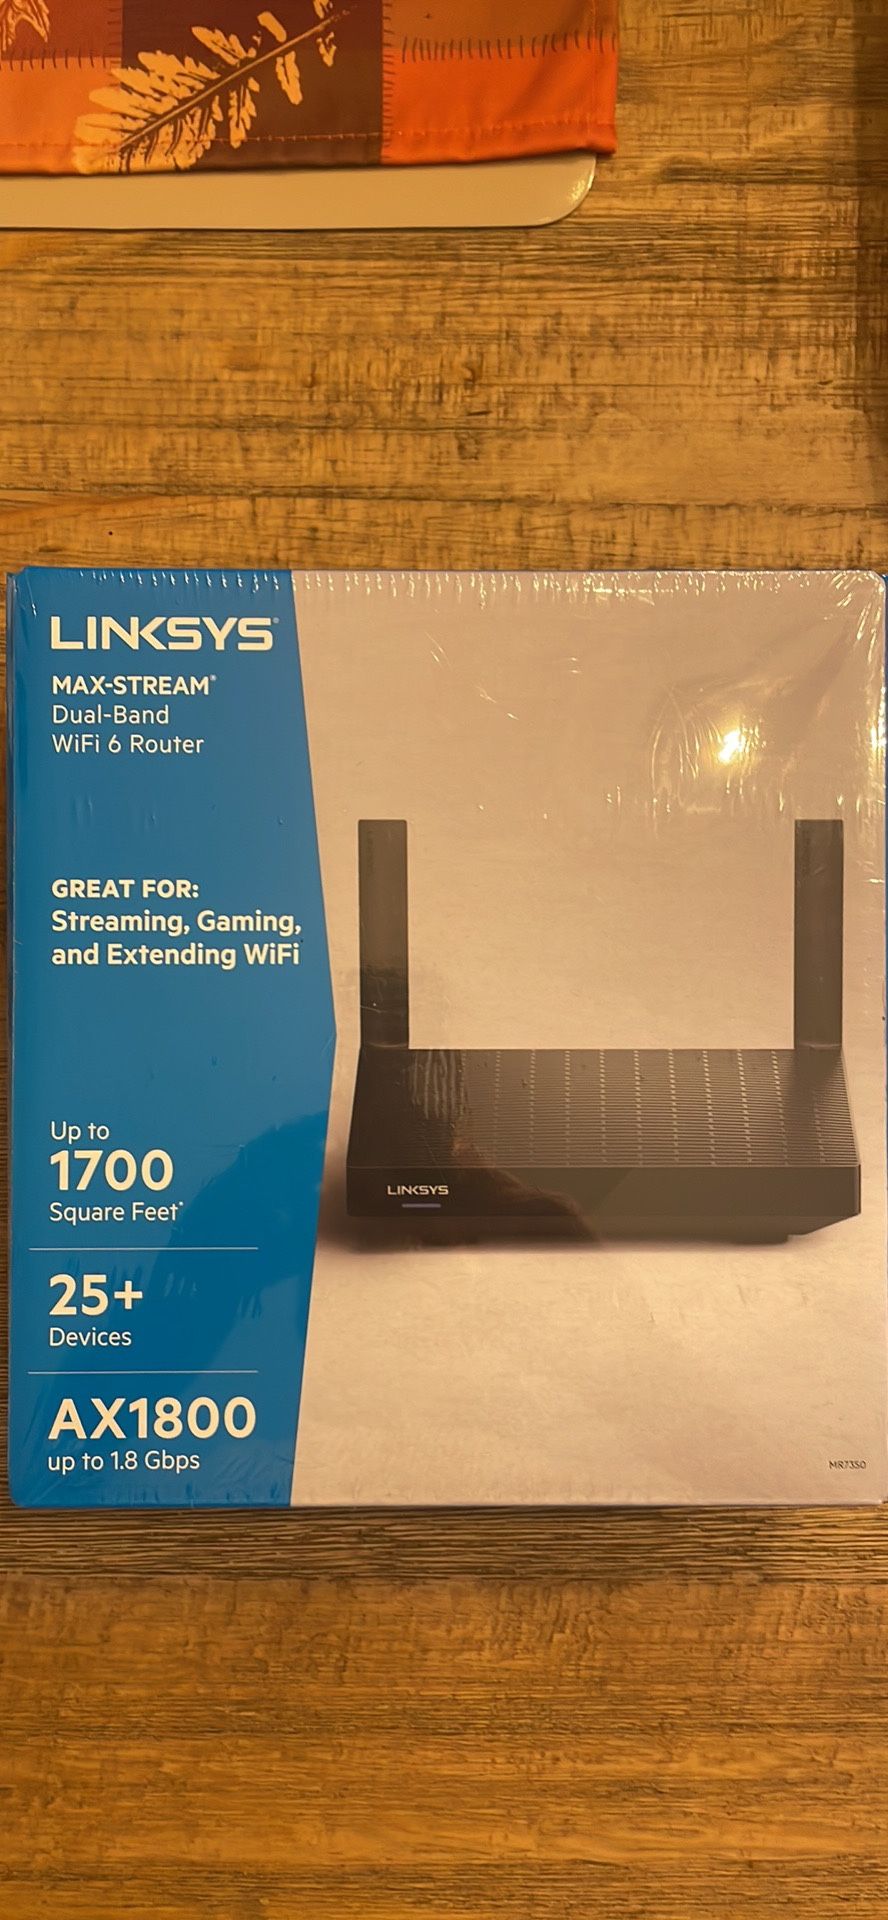 Linksys Mesh Wifi 6 Router, Dual-Band, 1,700 Sq. ft, 25+ Devices, Speeds up to 1.8Gbps - MR7350